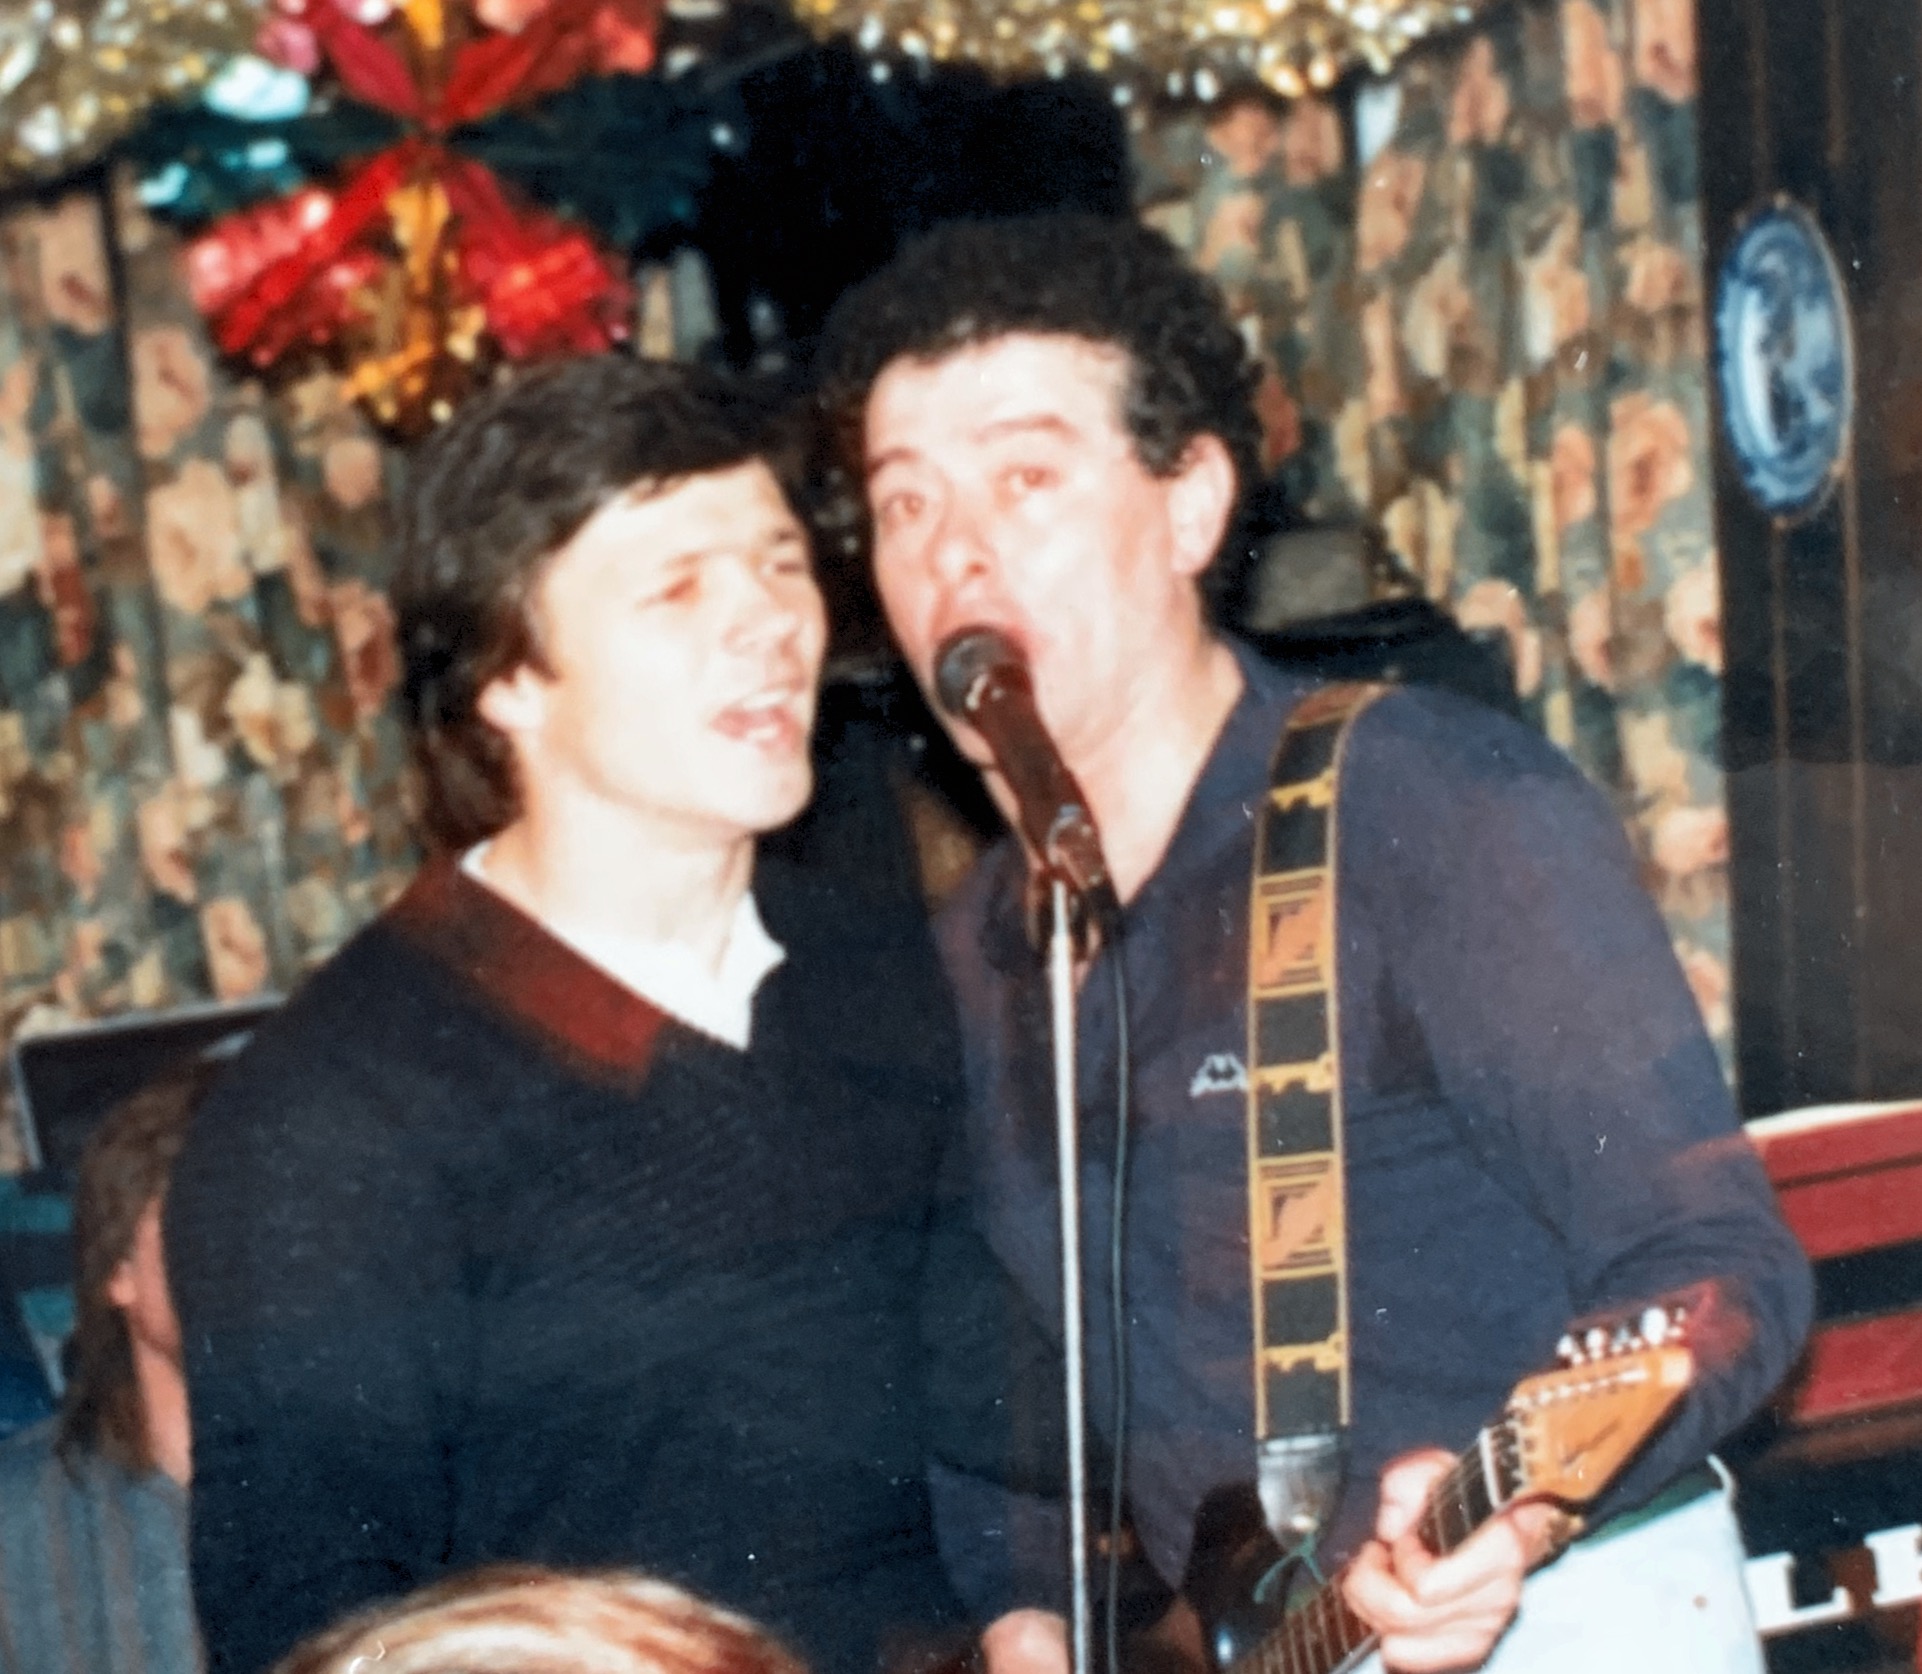 Steve Perryman and me
Spurs Christmas Party at The Bulls Head
Roughly 1985